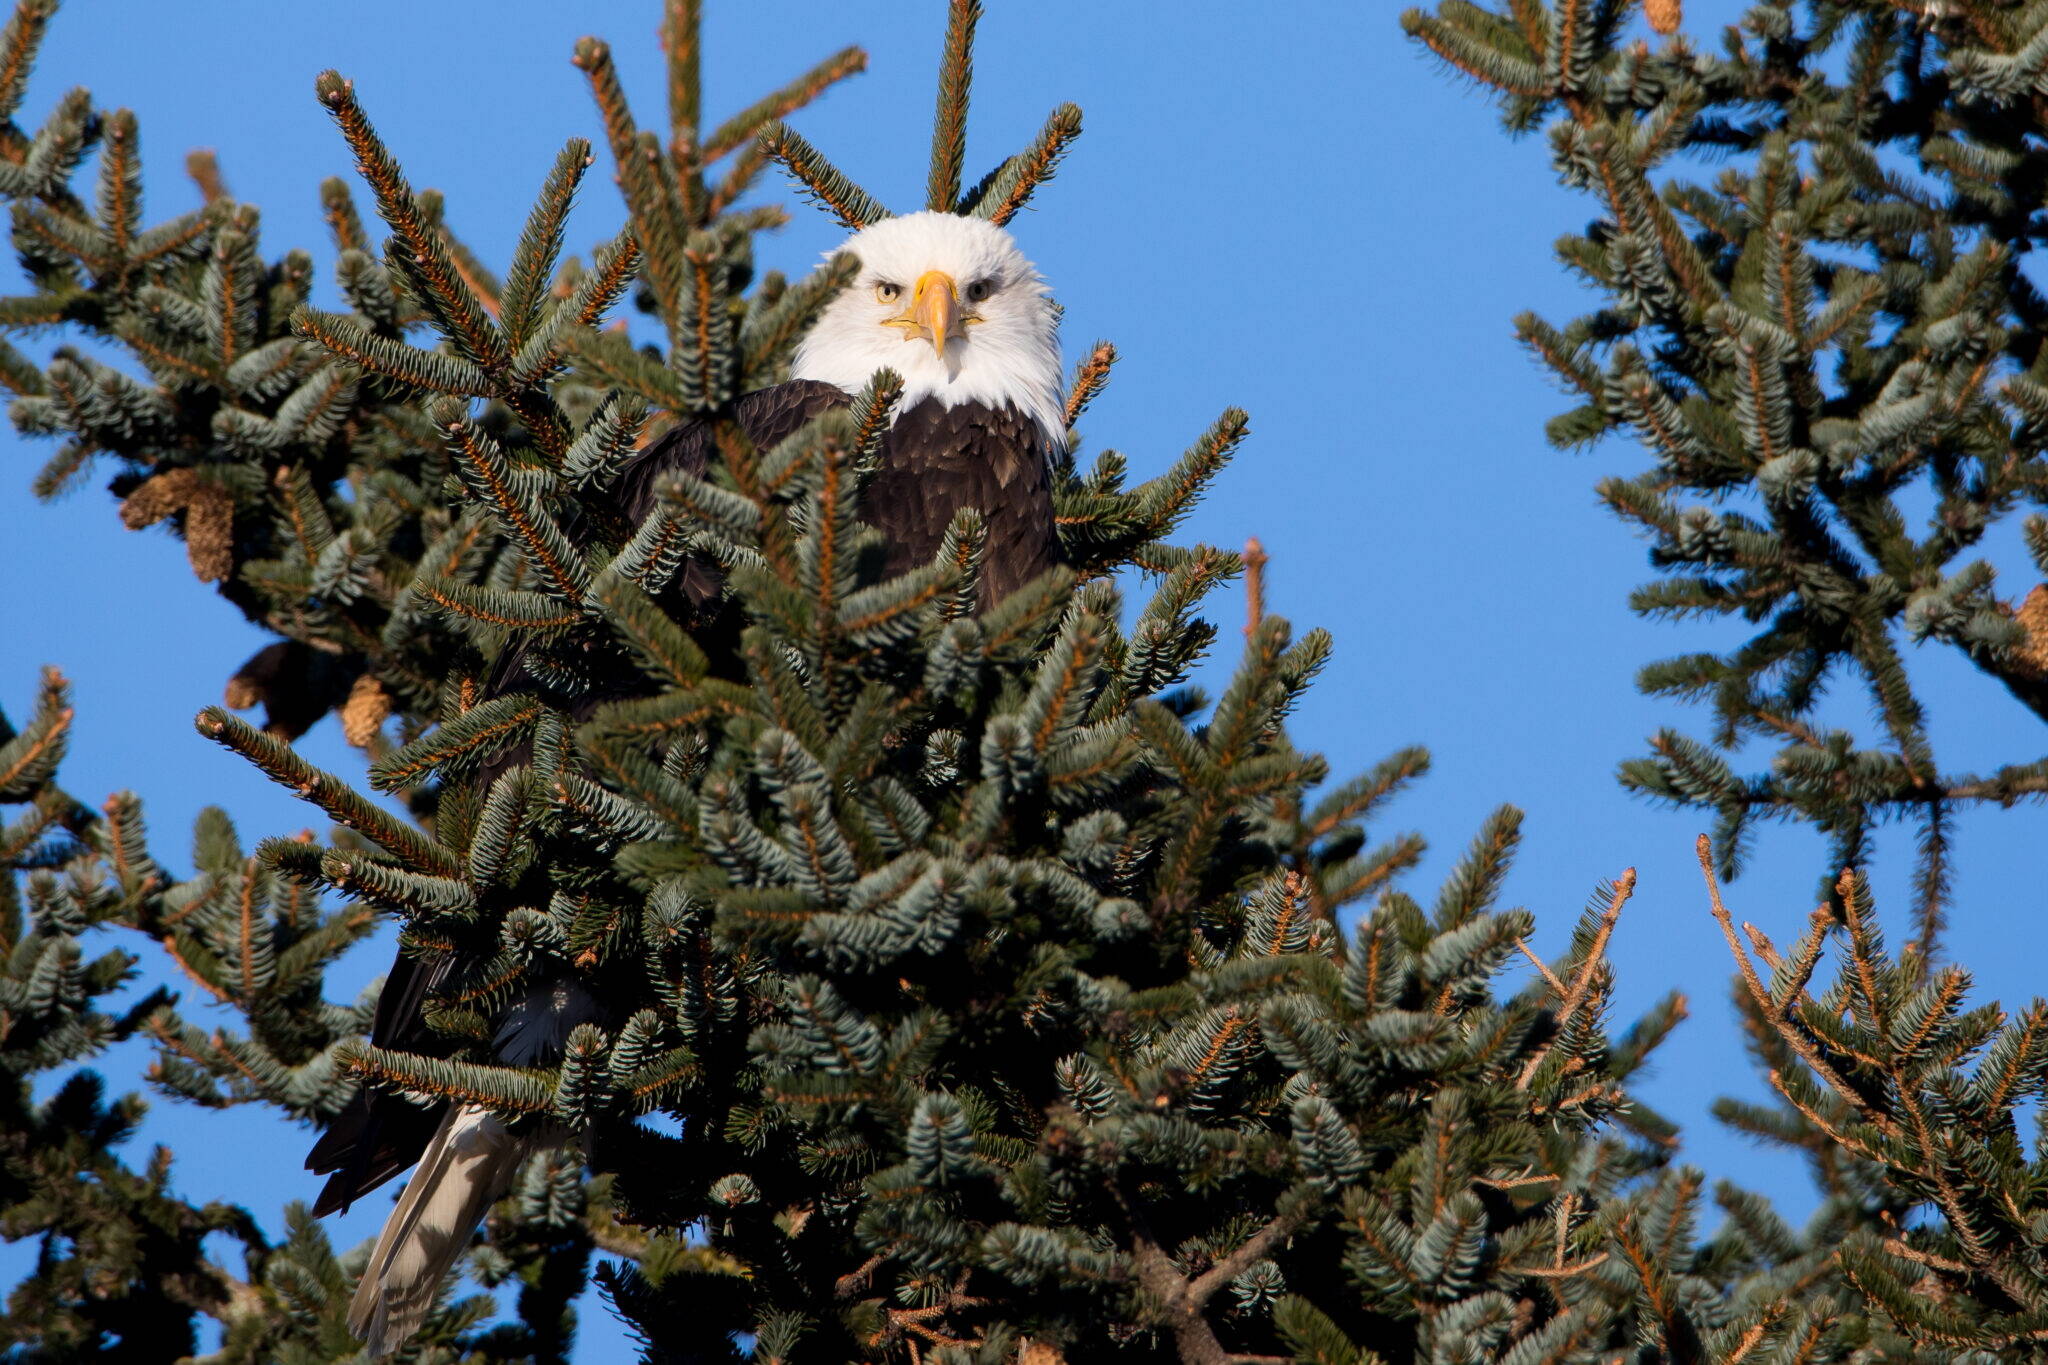 A bald eagle is seen on Feb. 6, 2018, perched in a tree in the Kodiak National Wildlife Refuge. Bald eagles are near the top of the list of bird species in Alaska that have been killed by the currently circulating strains of highly pathogenic avian influenza. (Photo by Lisa Hupp/U.S. Fish and Wildlife Service)